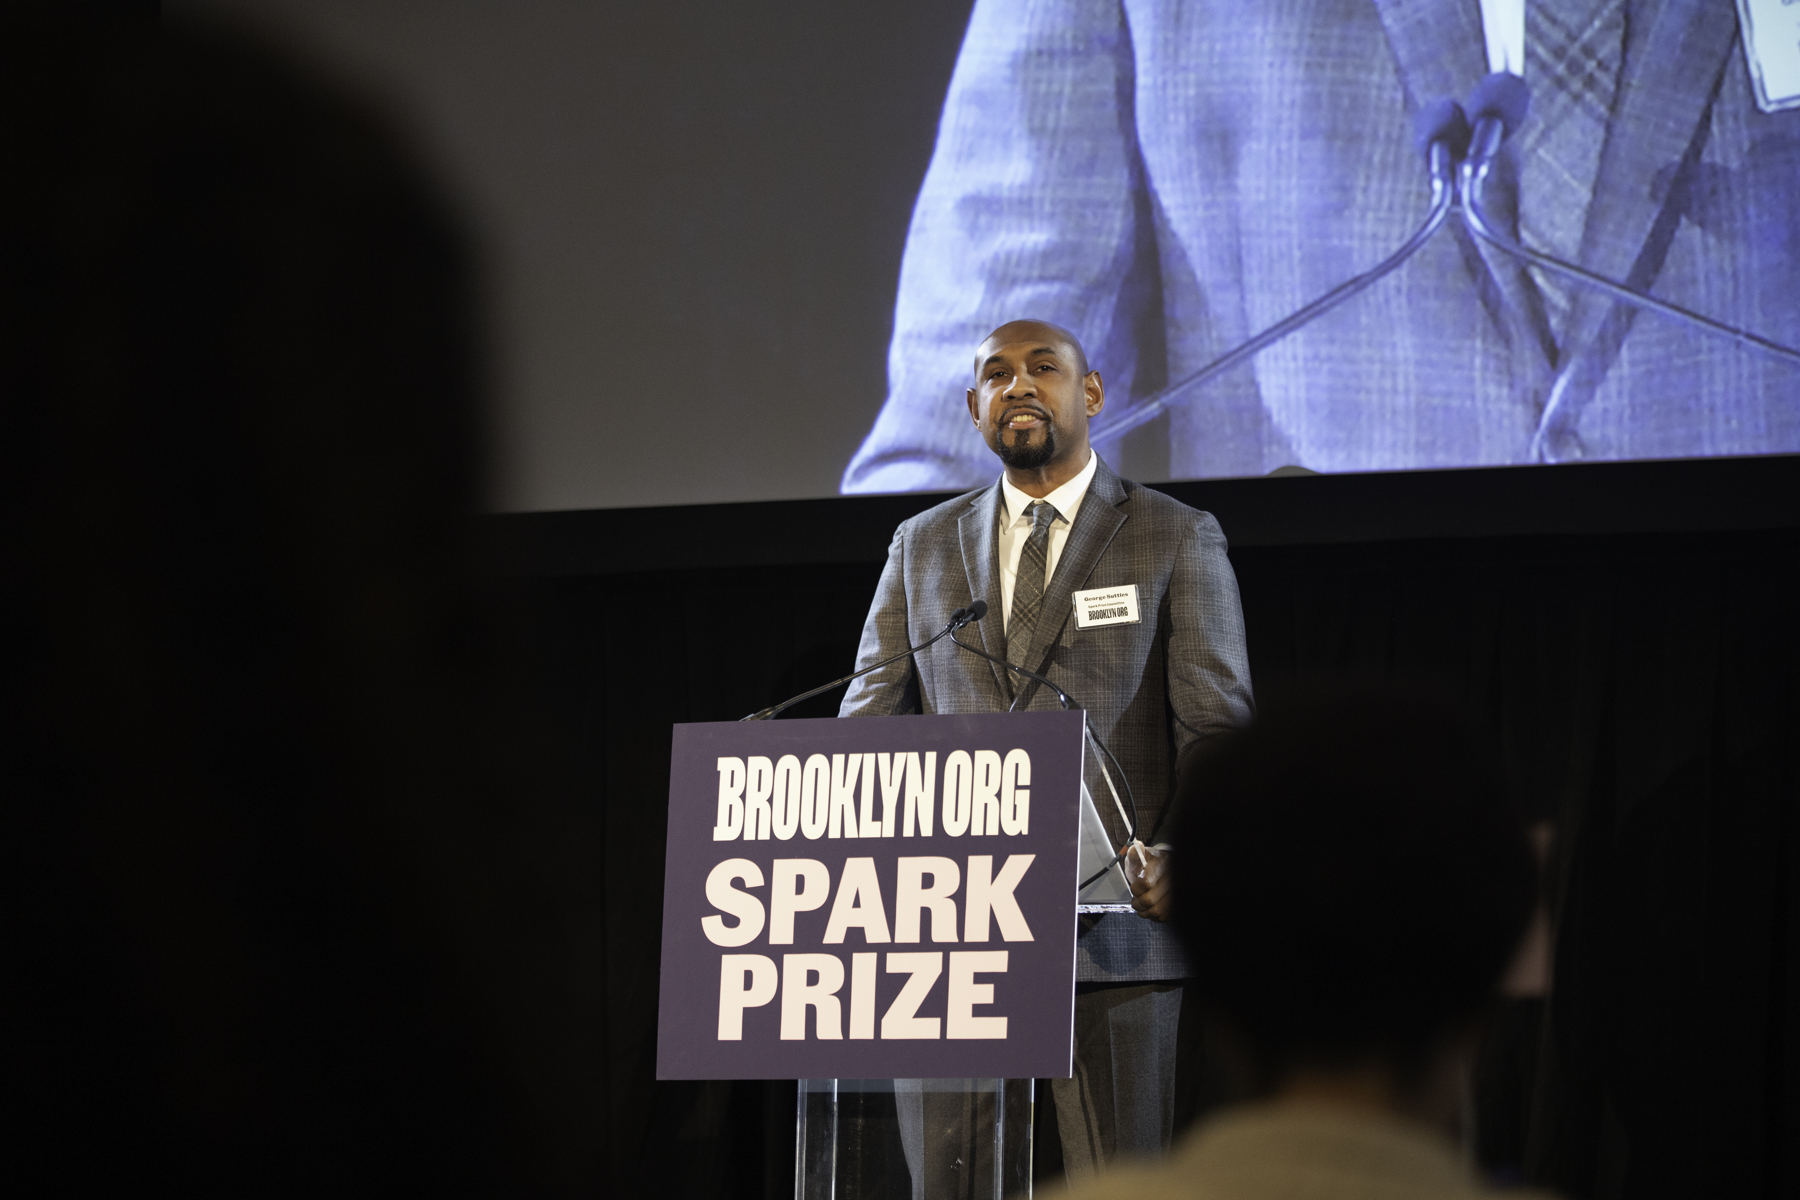 A man delivering a speech at the brooklyn spark prize event.